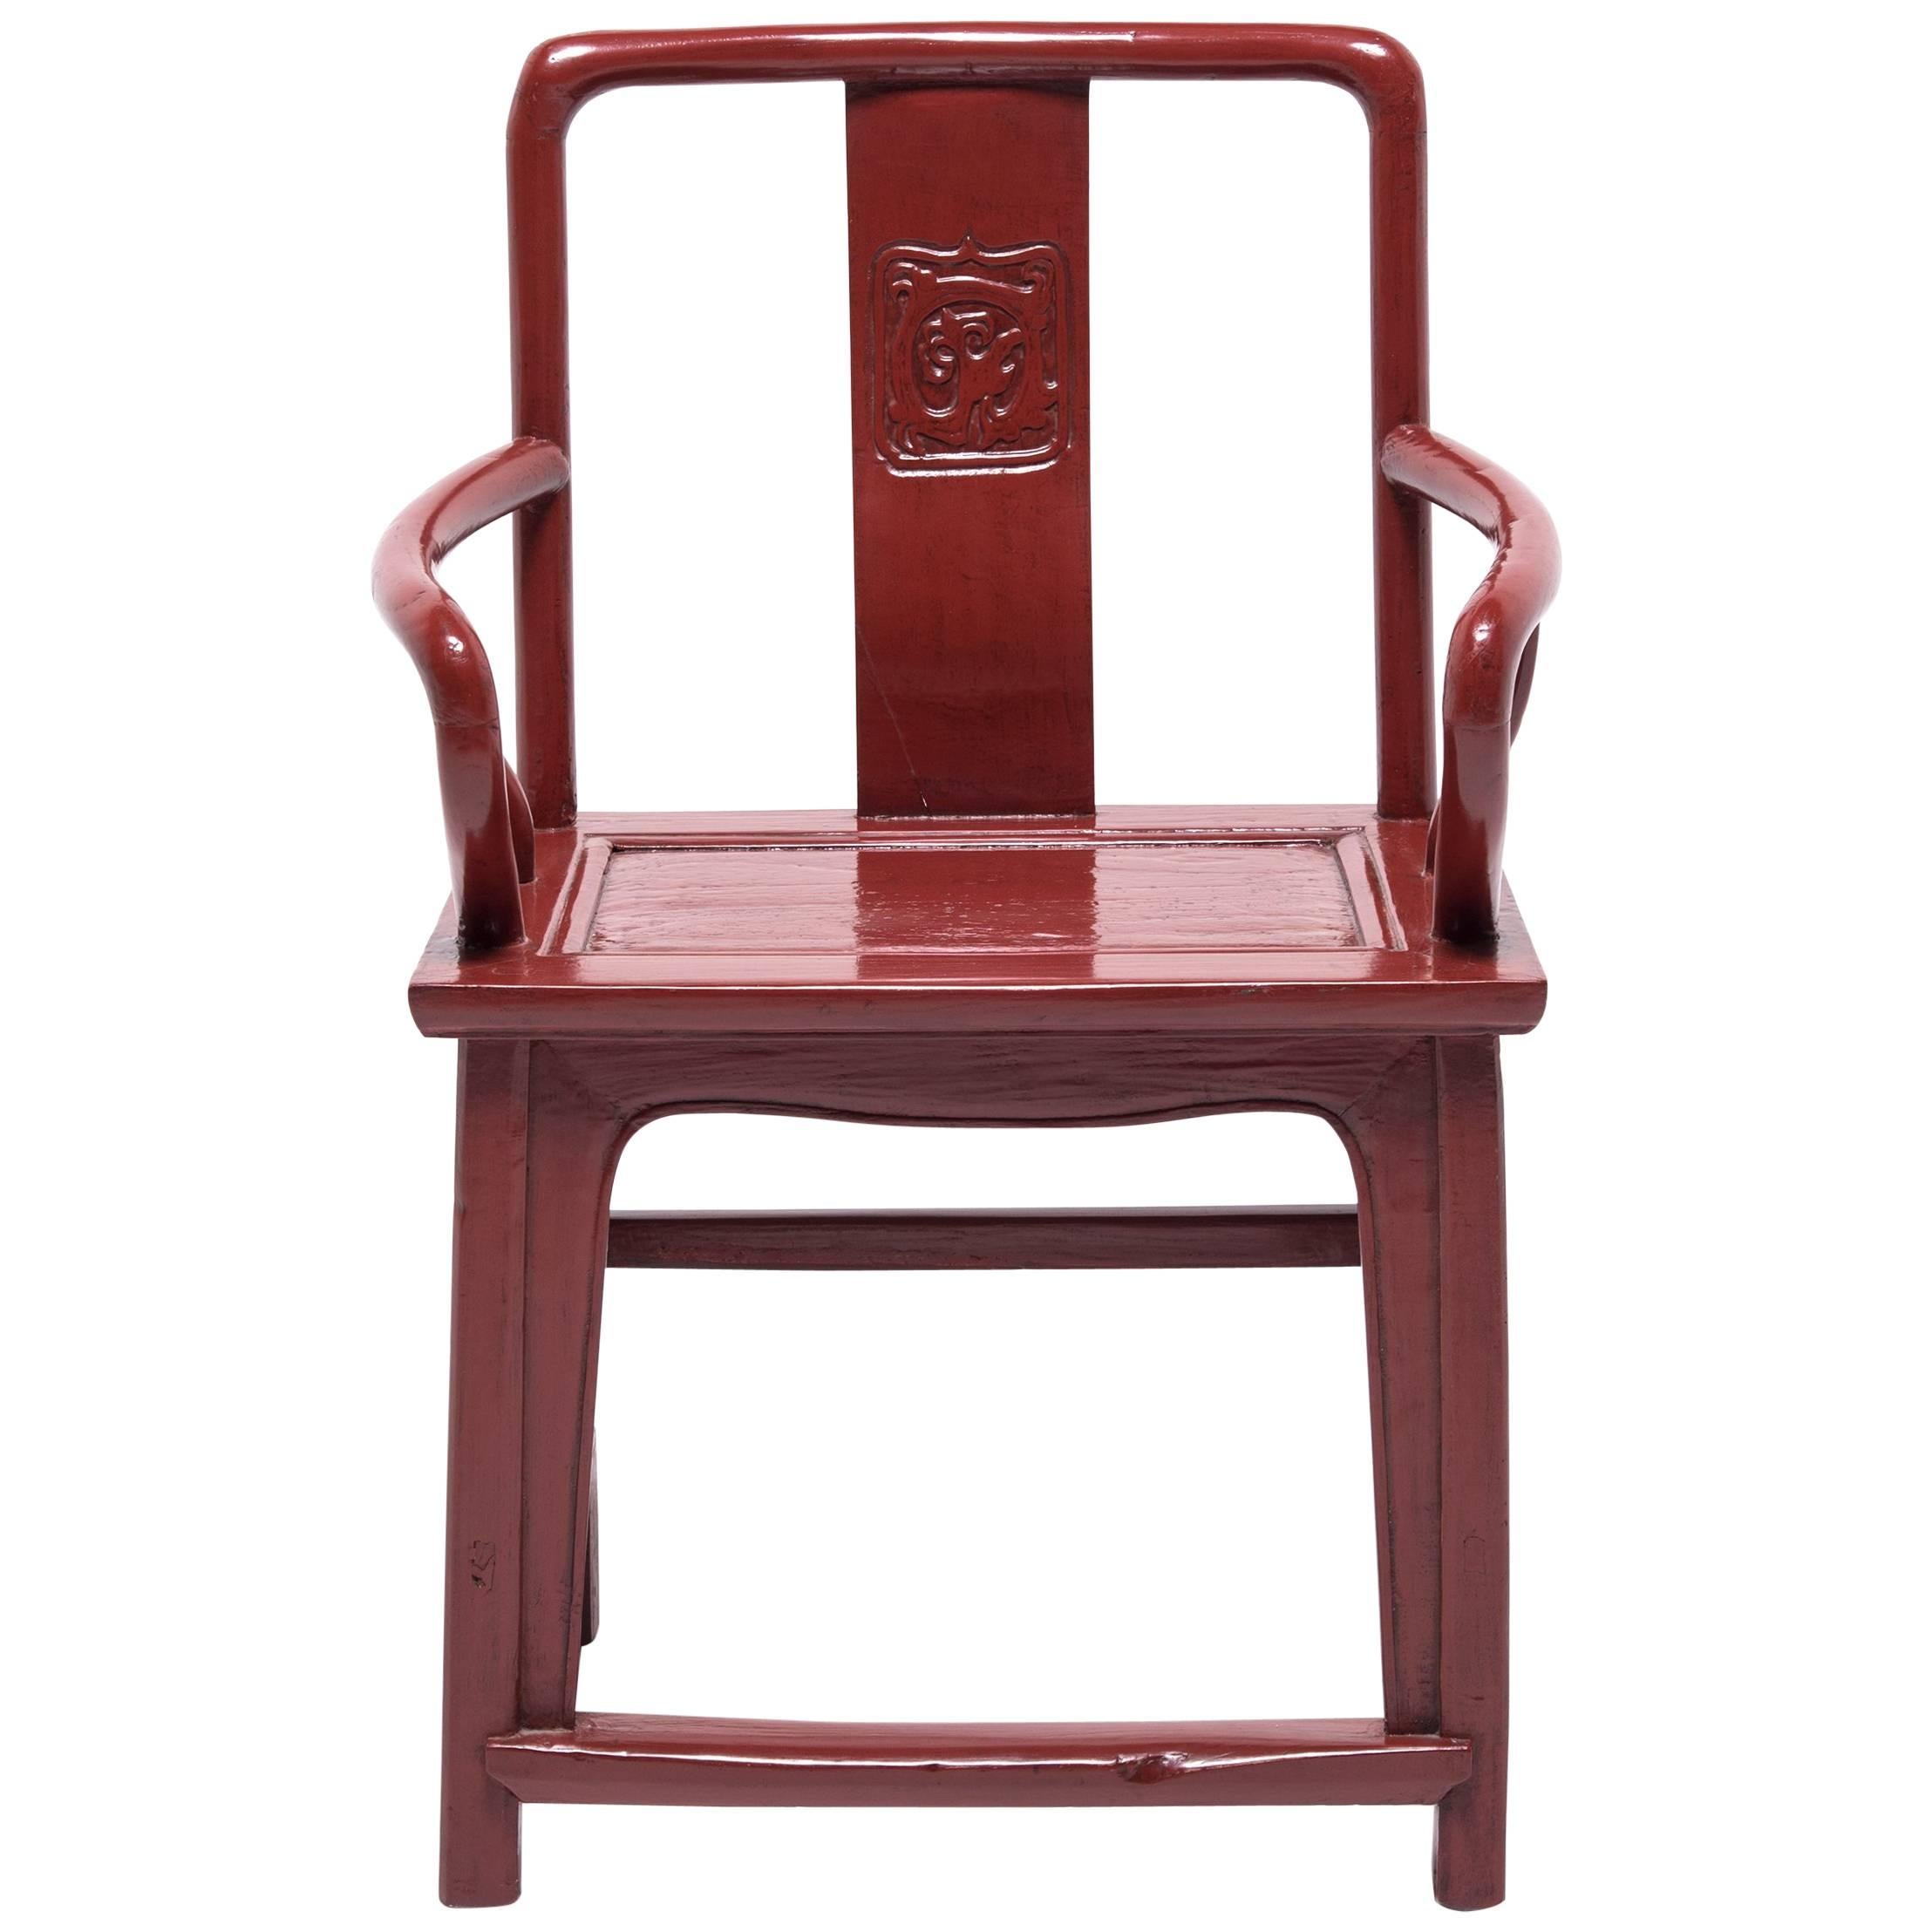 Chinese Red Lacquer Official's Chair, c. 1900 For Sale